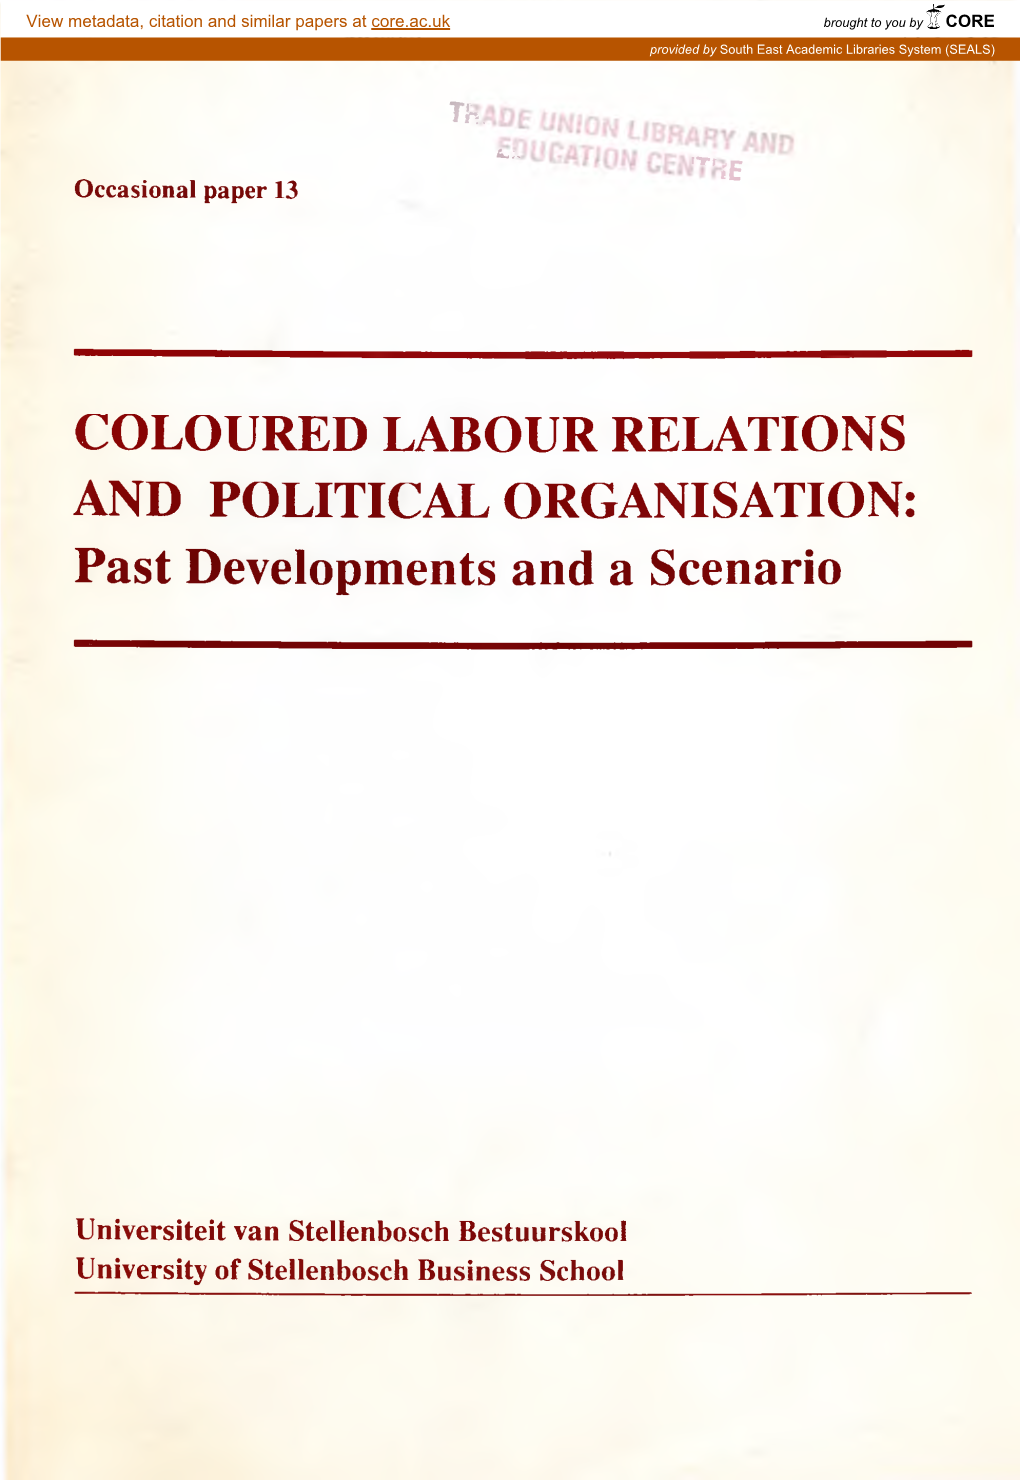 COLOURED LABOUR RELATIONS and POLITICAL ORGANISATION: Past Developments and a Scenario